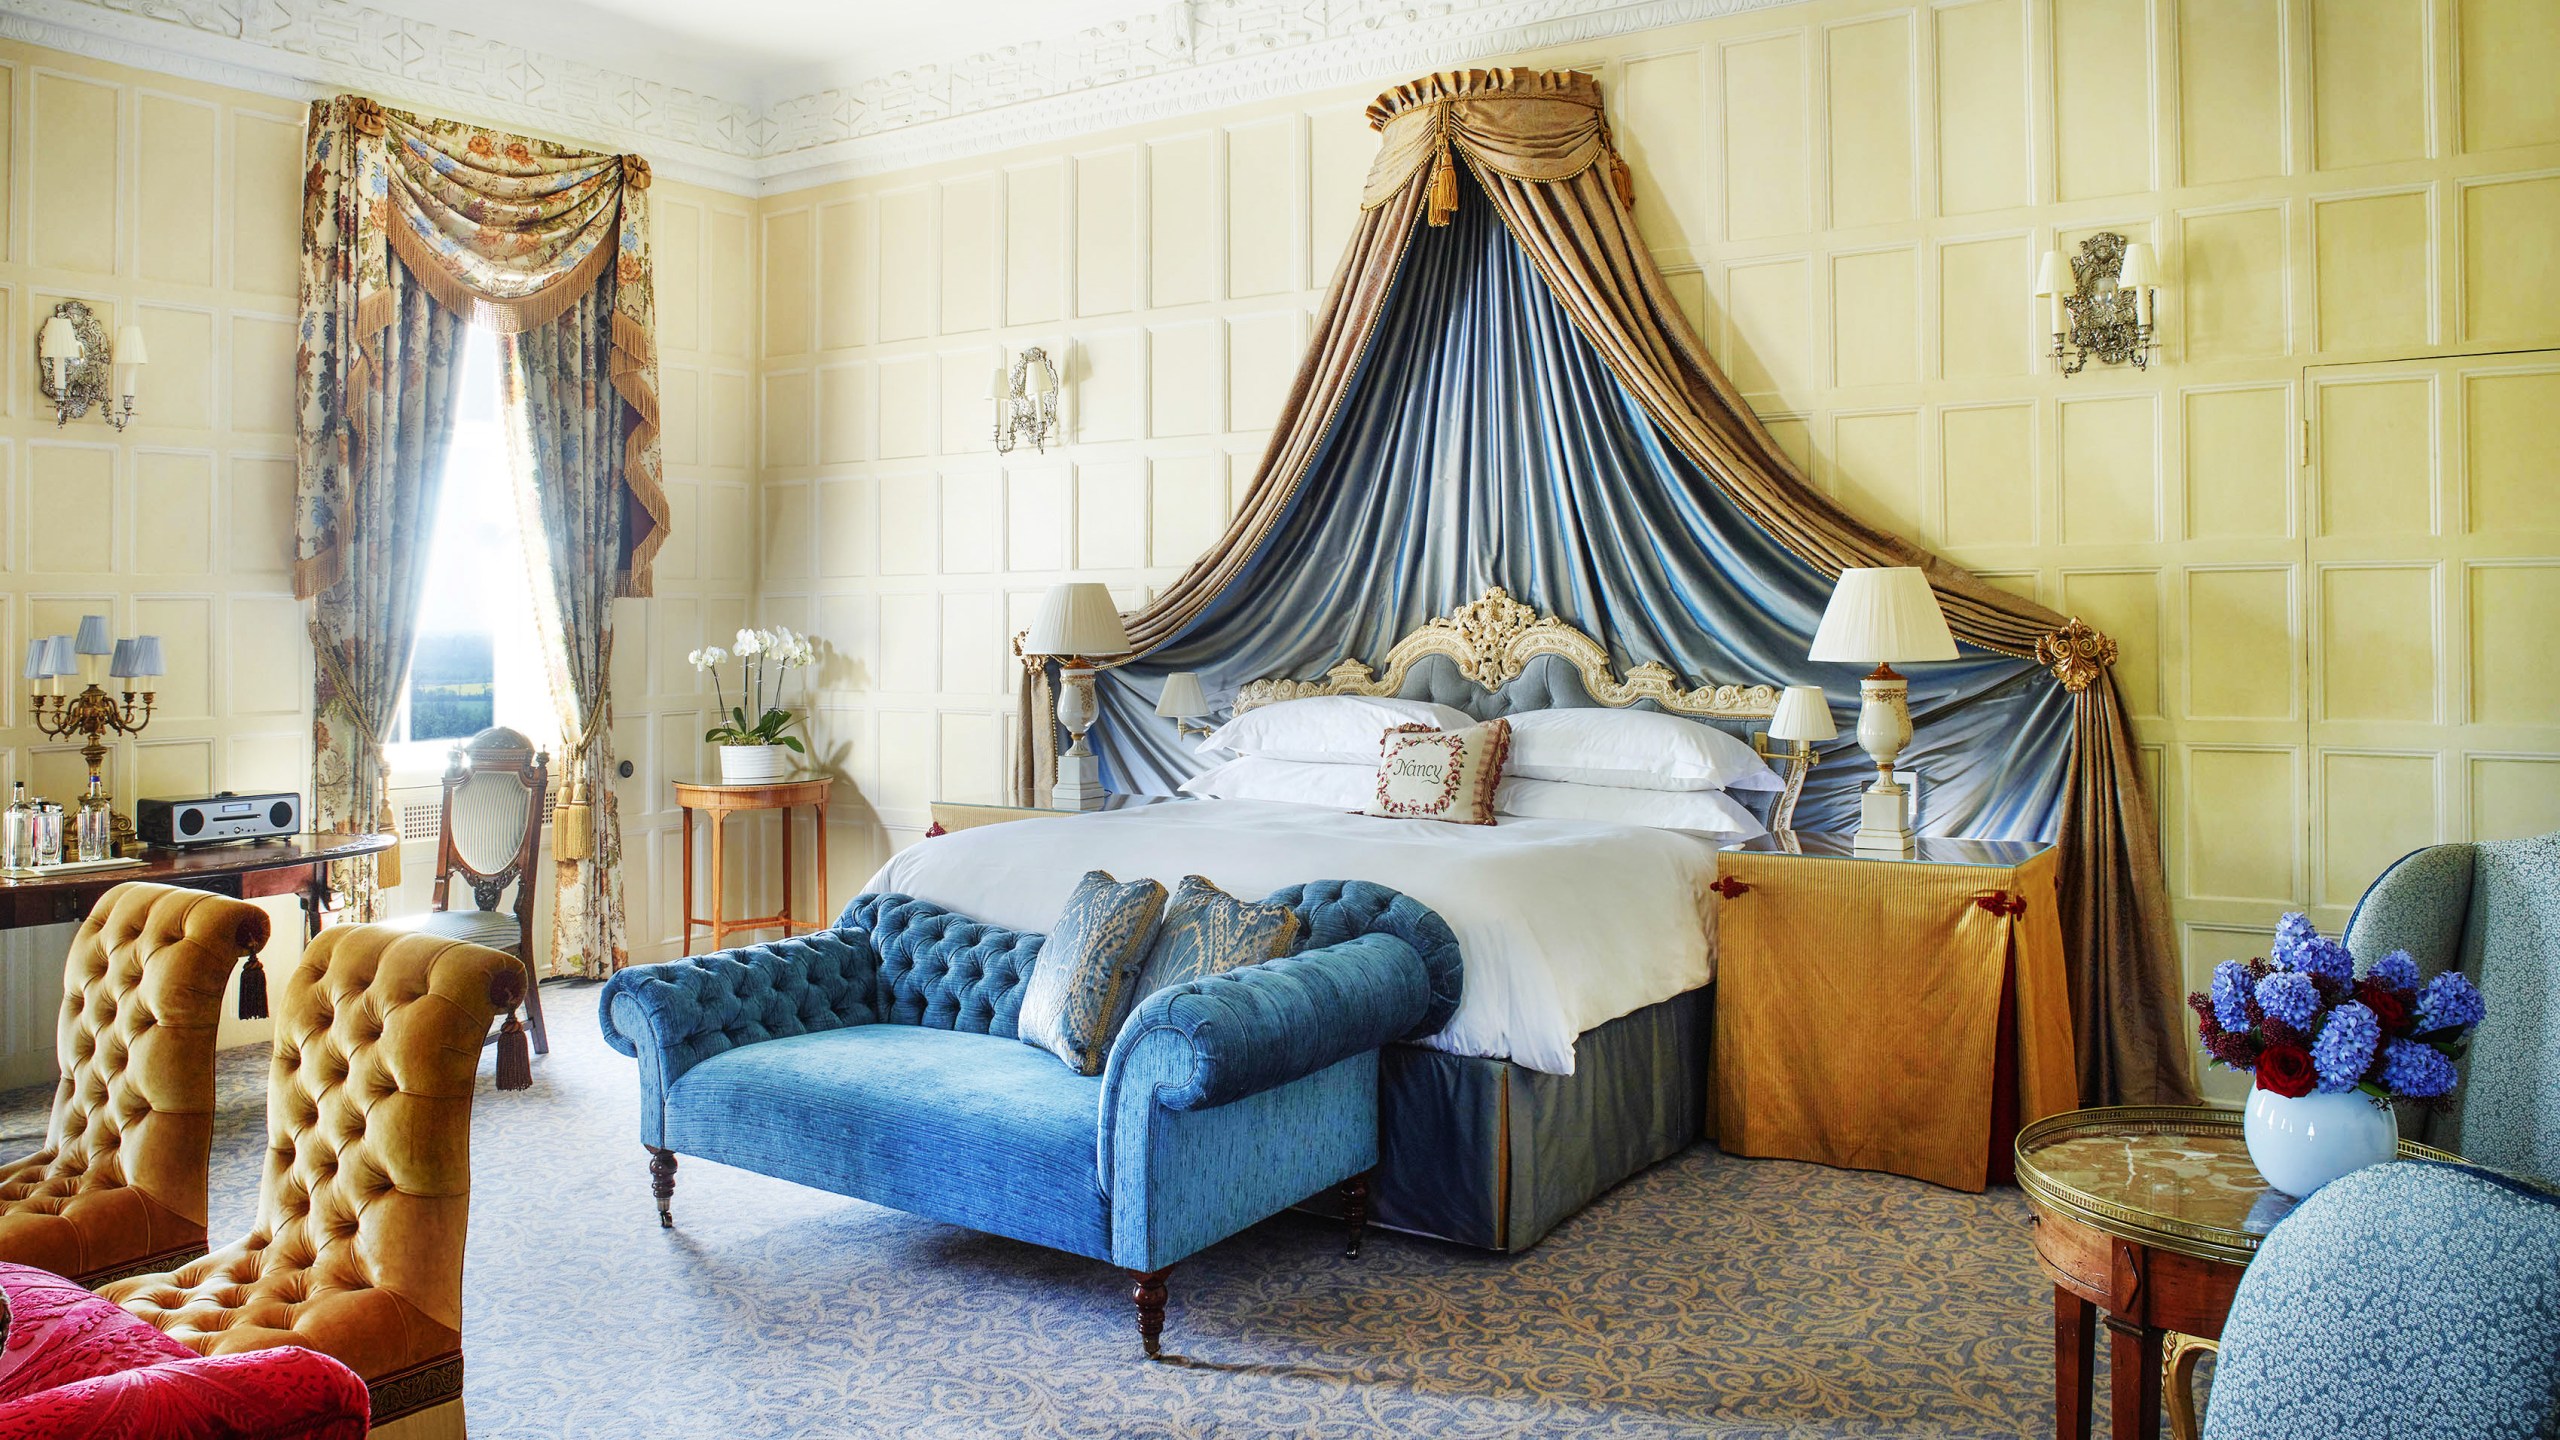 The Lady Astor Suite